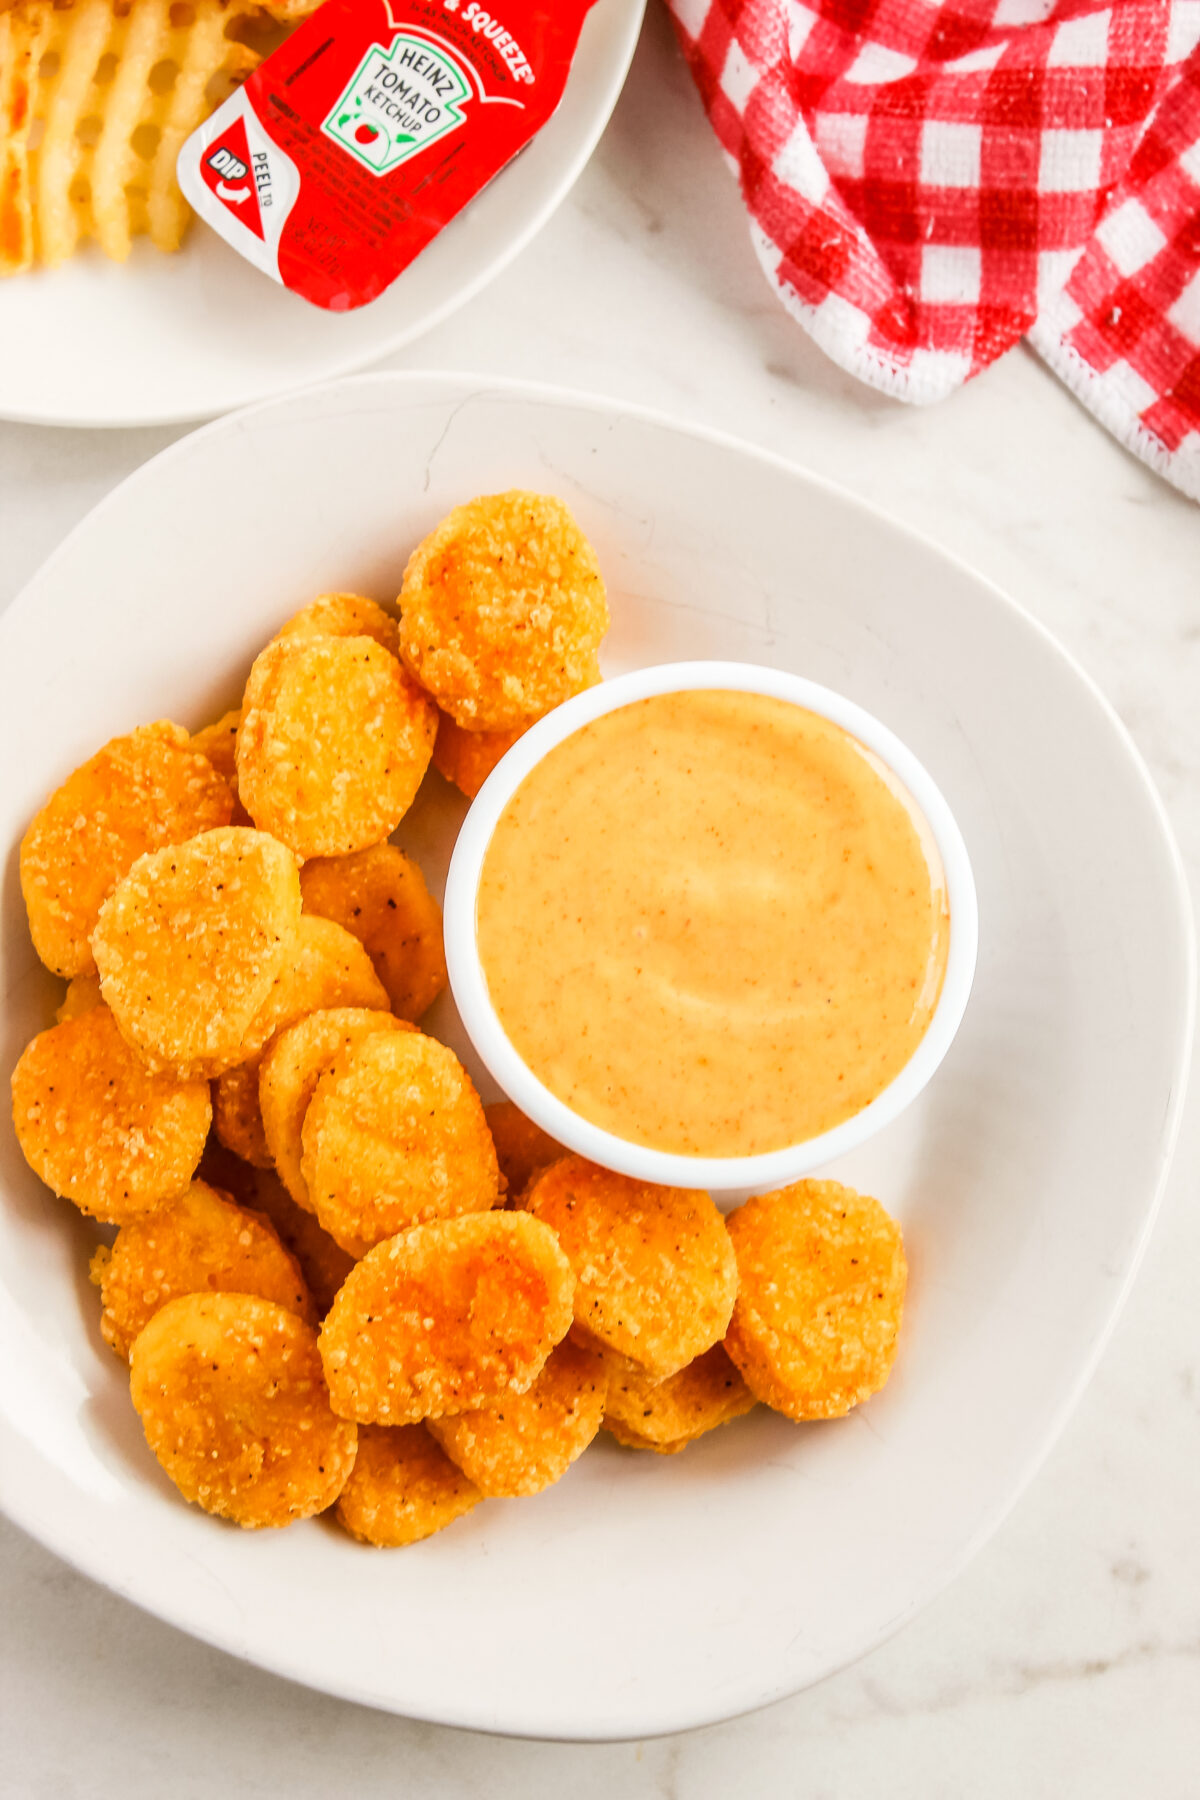 This easy copycat Chick-fil-A sauce tastes like the real deal; it's great for dipping fries, chicken, or anything else your heart desires!